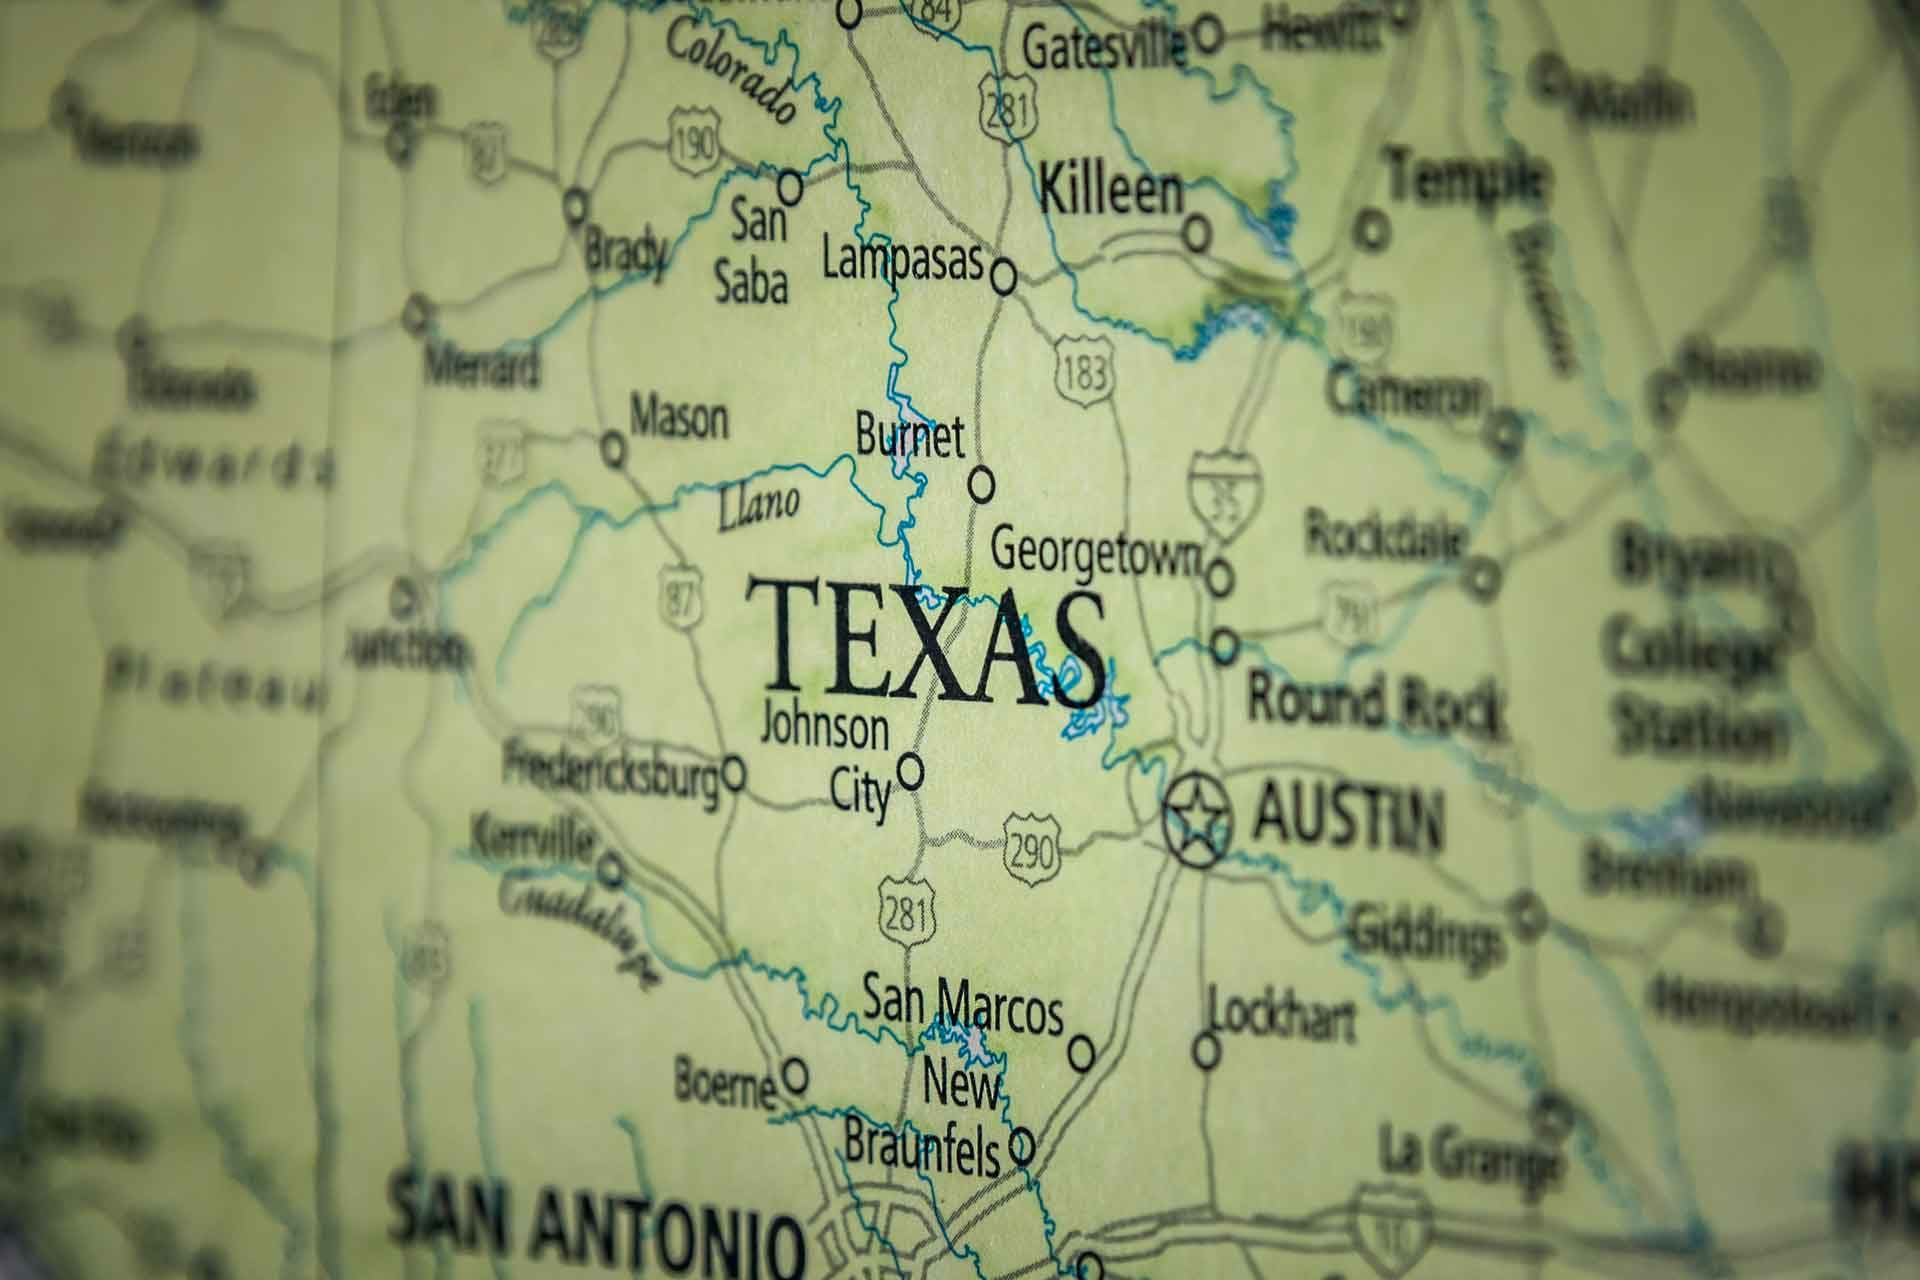 Old Historical City, County And State Maps Of Texas - Texas Historical Maps Online